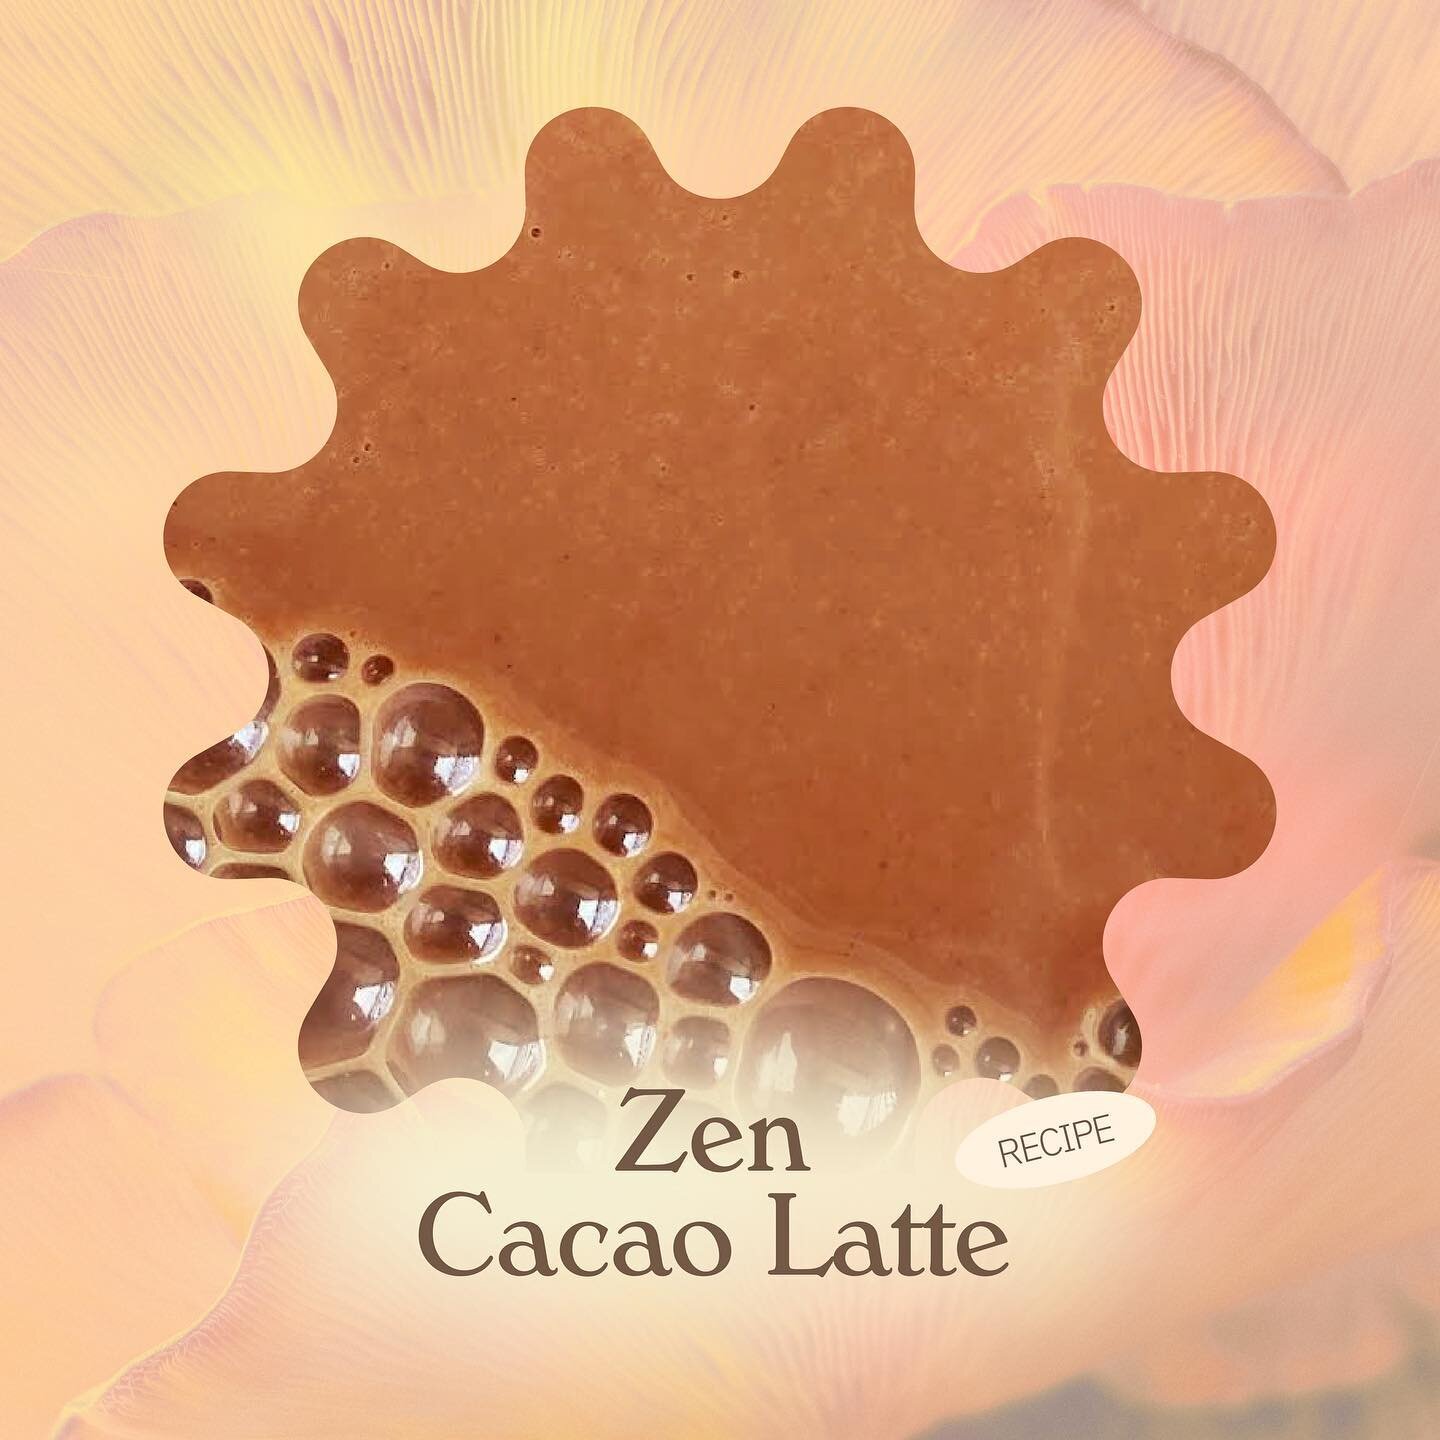 Zen Cacao for those busy December days when you just need to CHILL. Here's how to whip up a Zen Cacao latte 🍄⚡